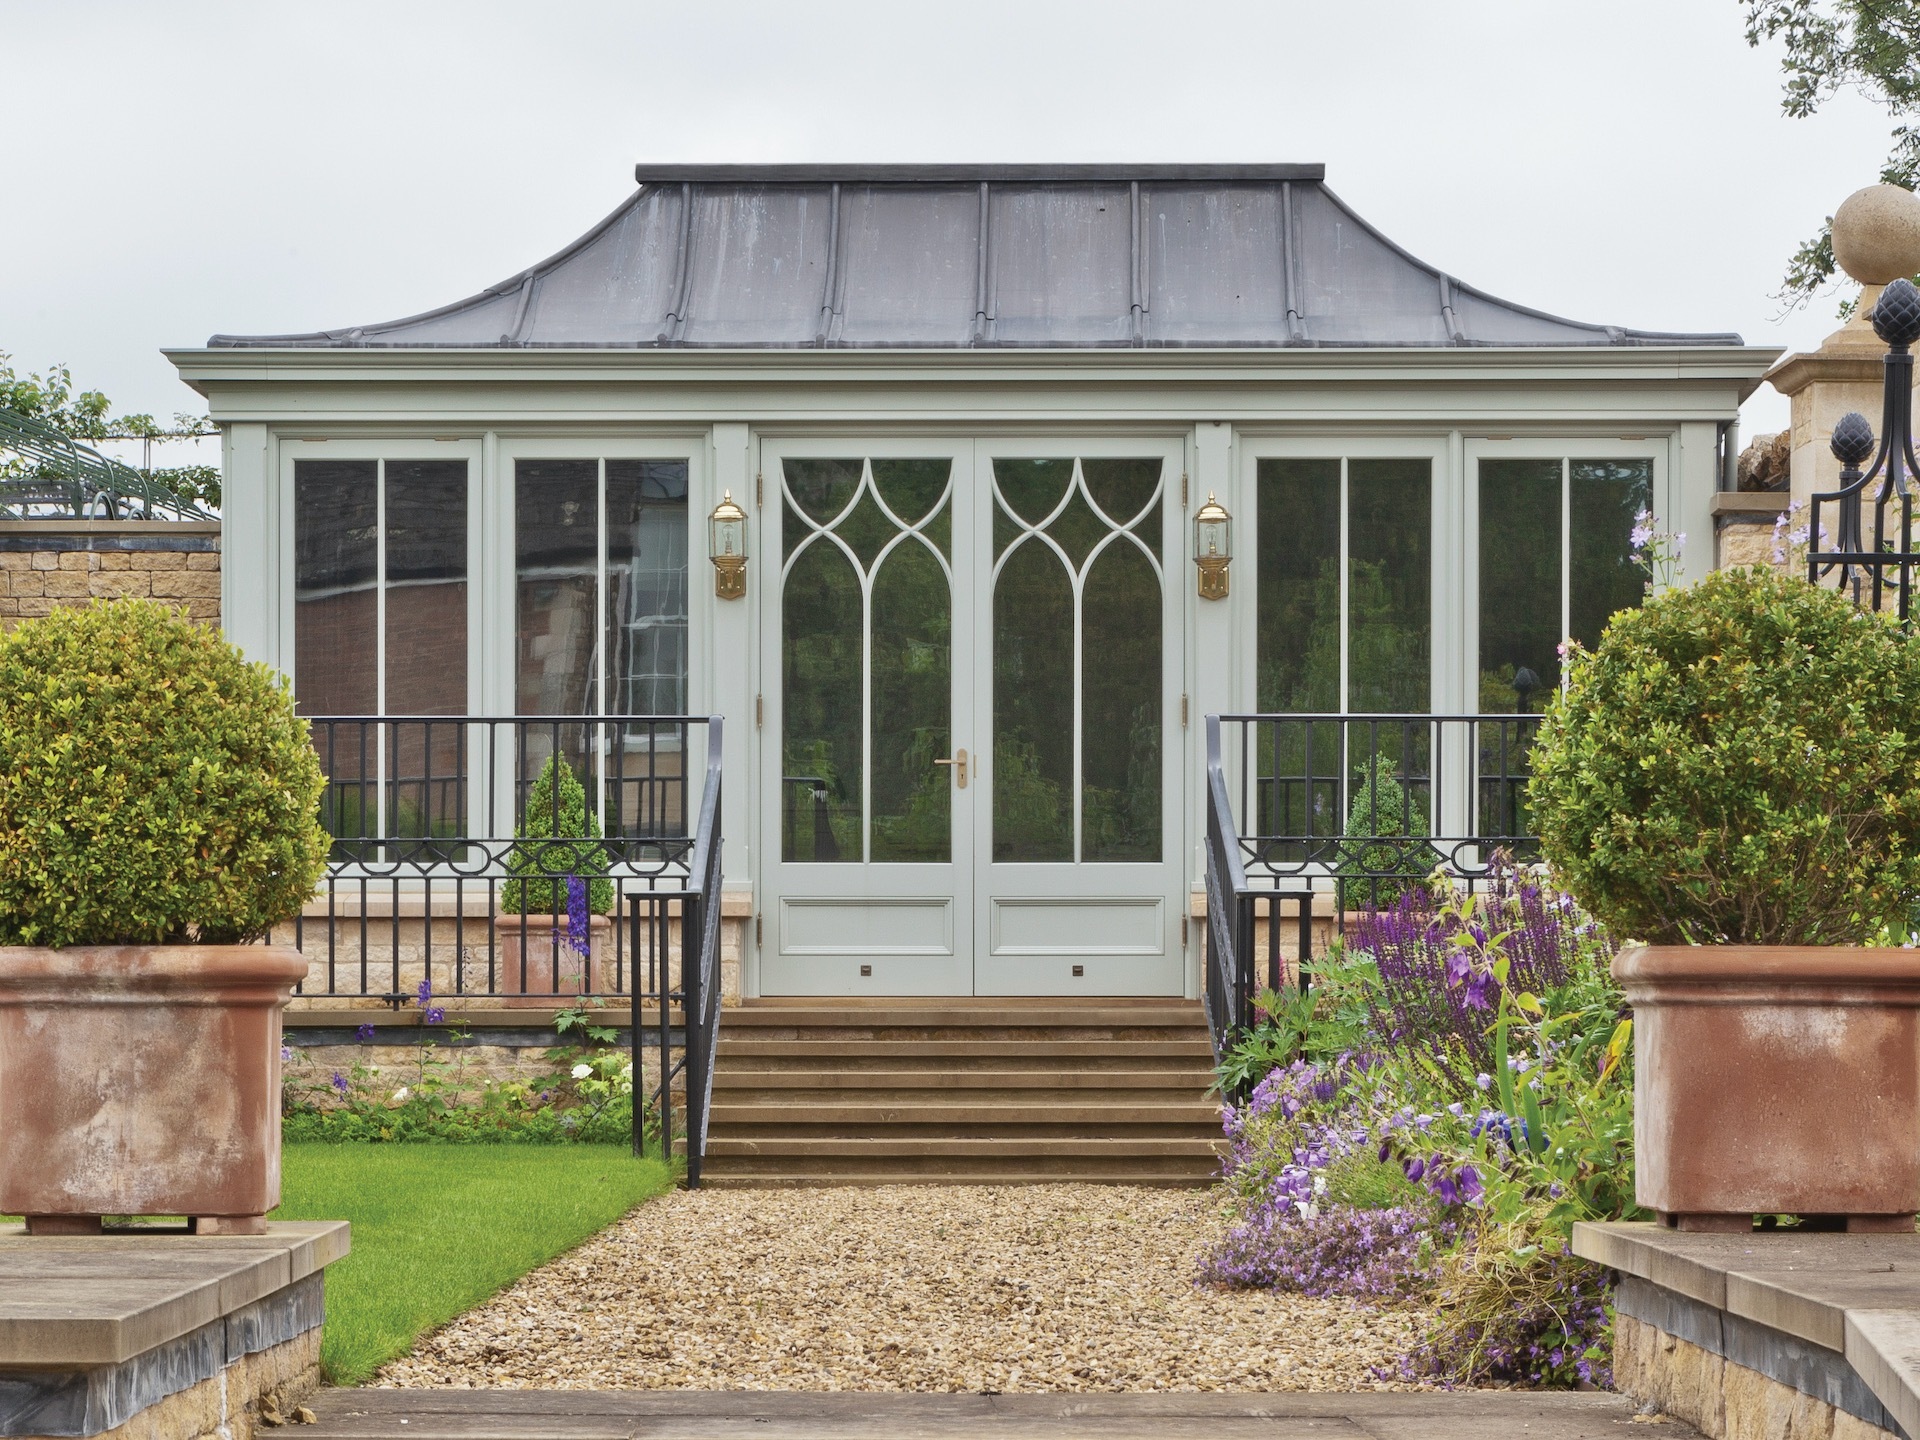 Large orangery style garden room by Vale